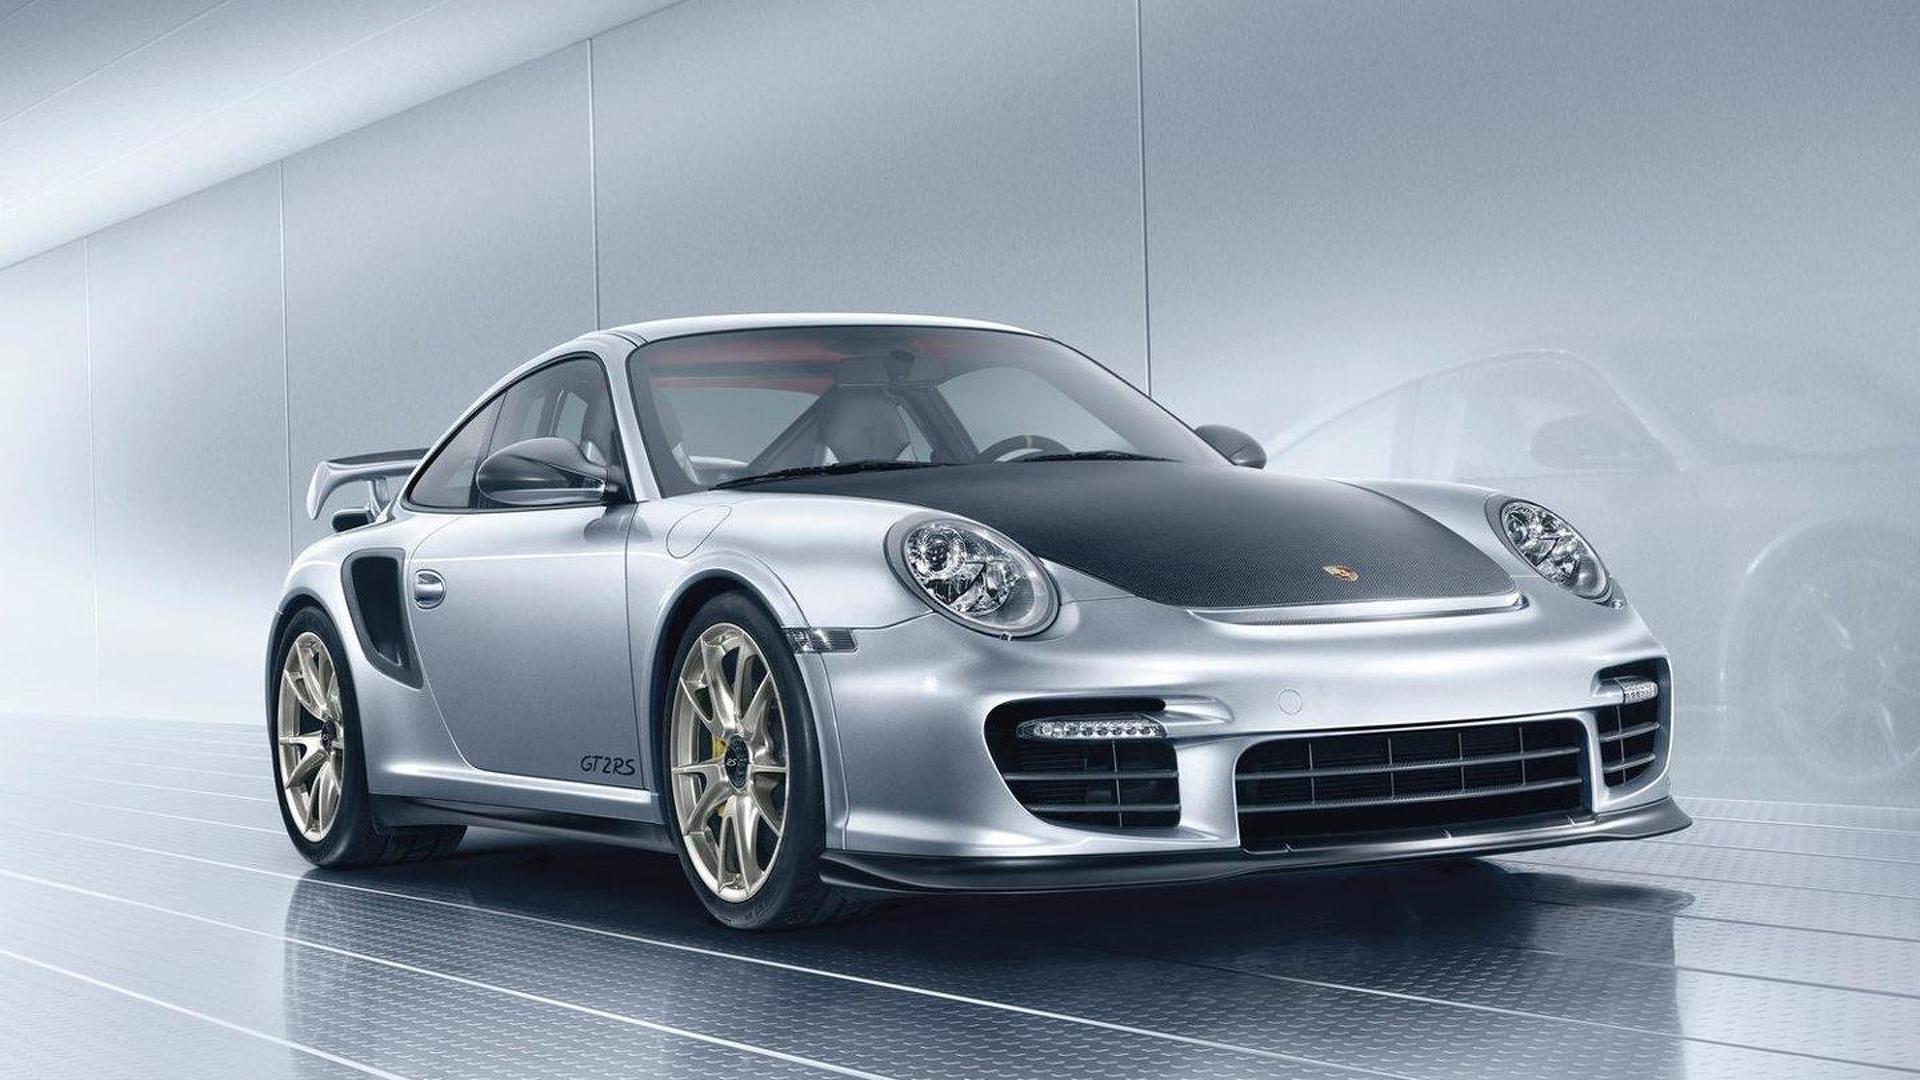 Porsche 911 GT2 RS confirmed, due in 2018 most likely